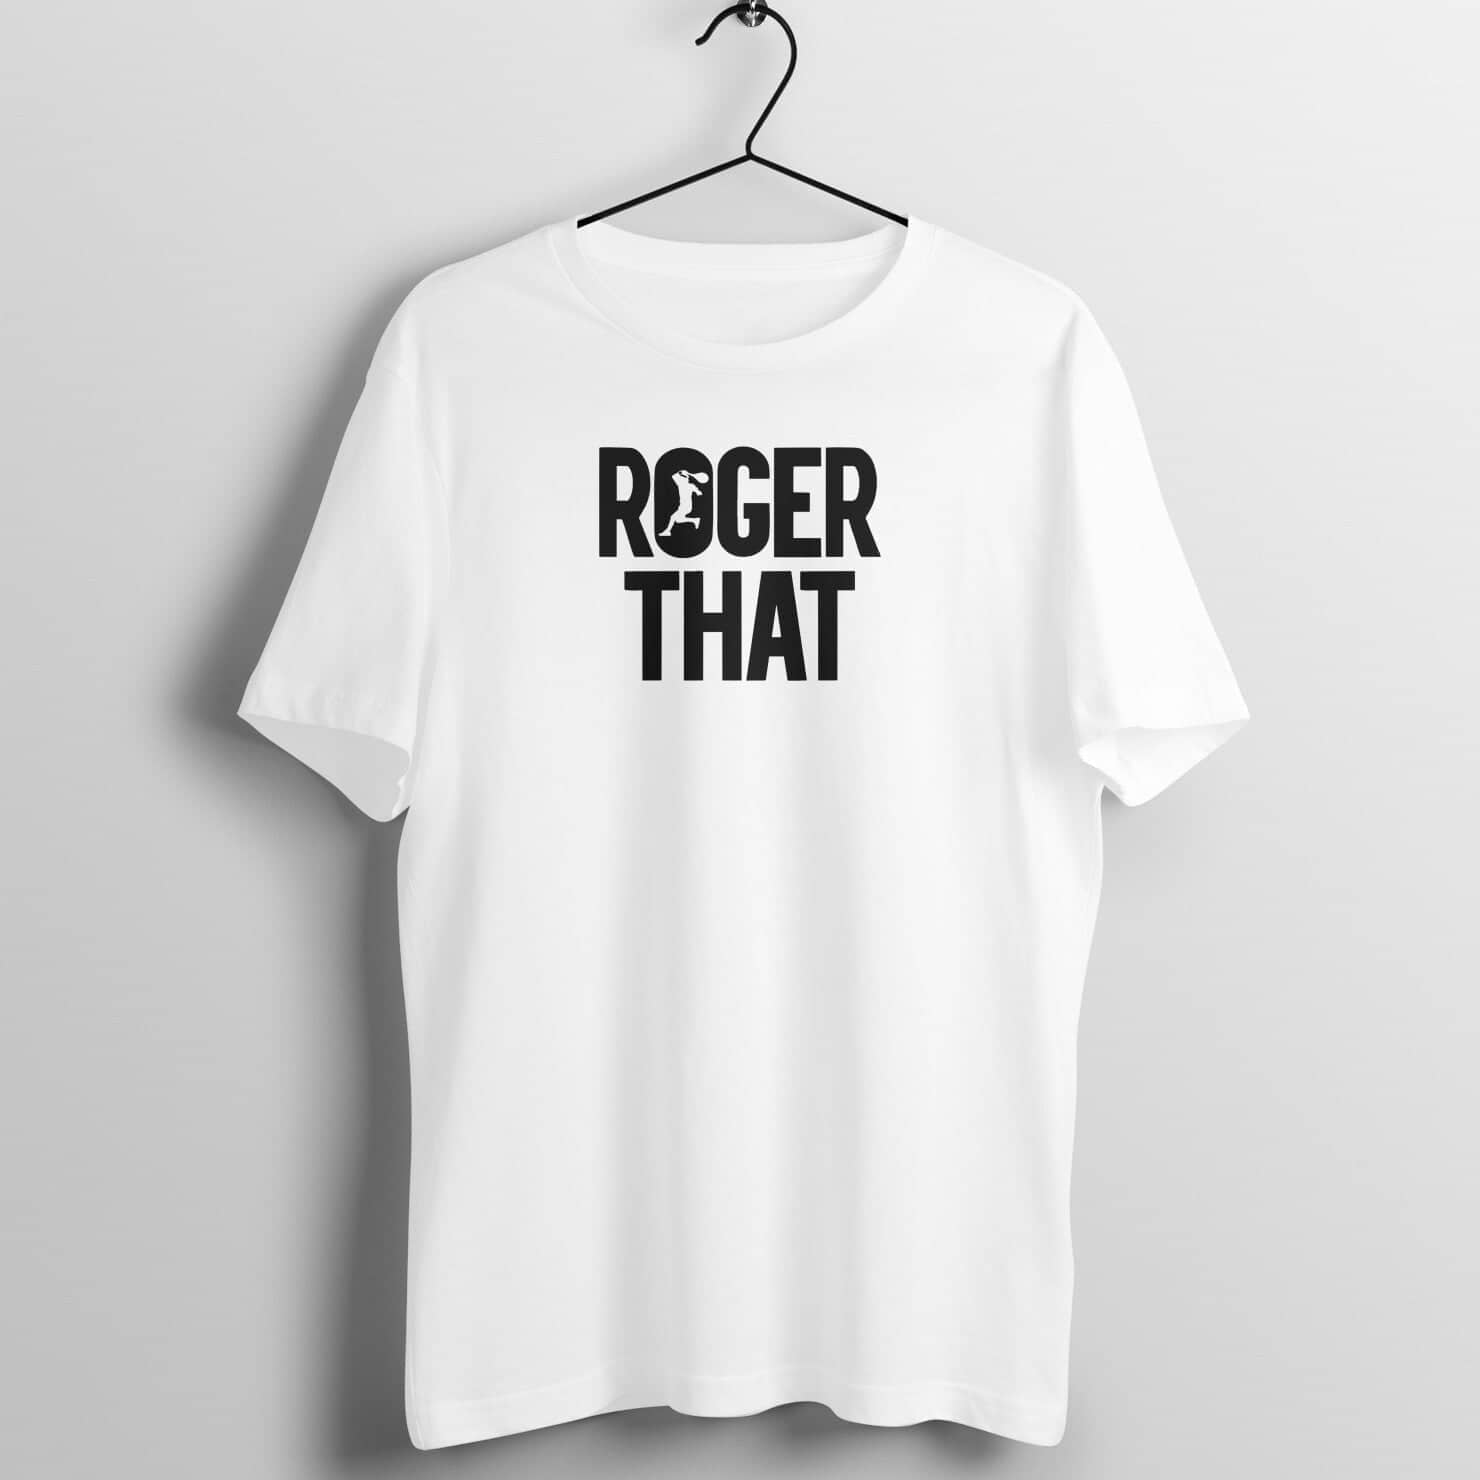 Roger That Exclusive Black Tennis T Shirt for Men and Women Shirts & Tops Printrove White S 